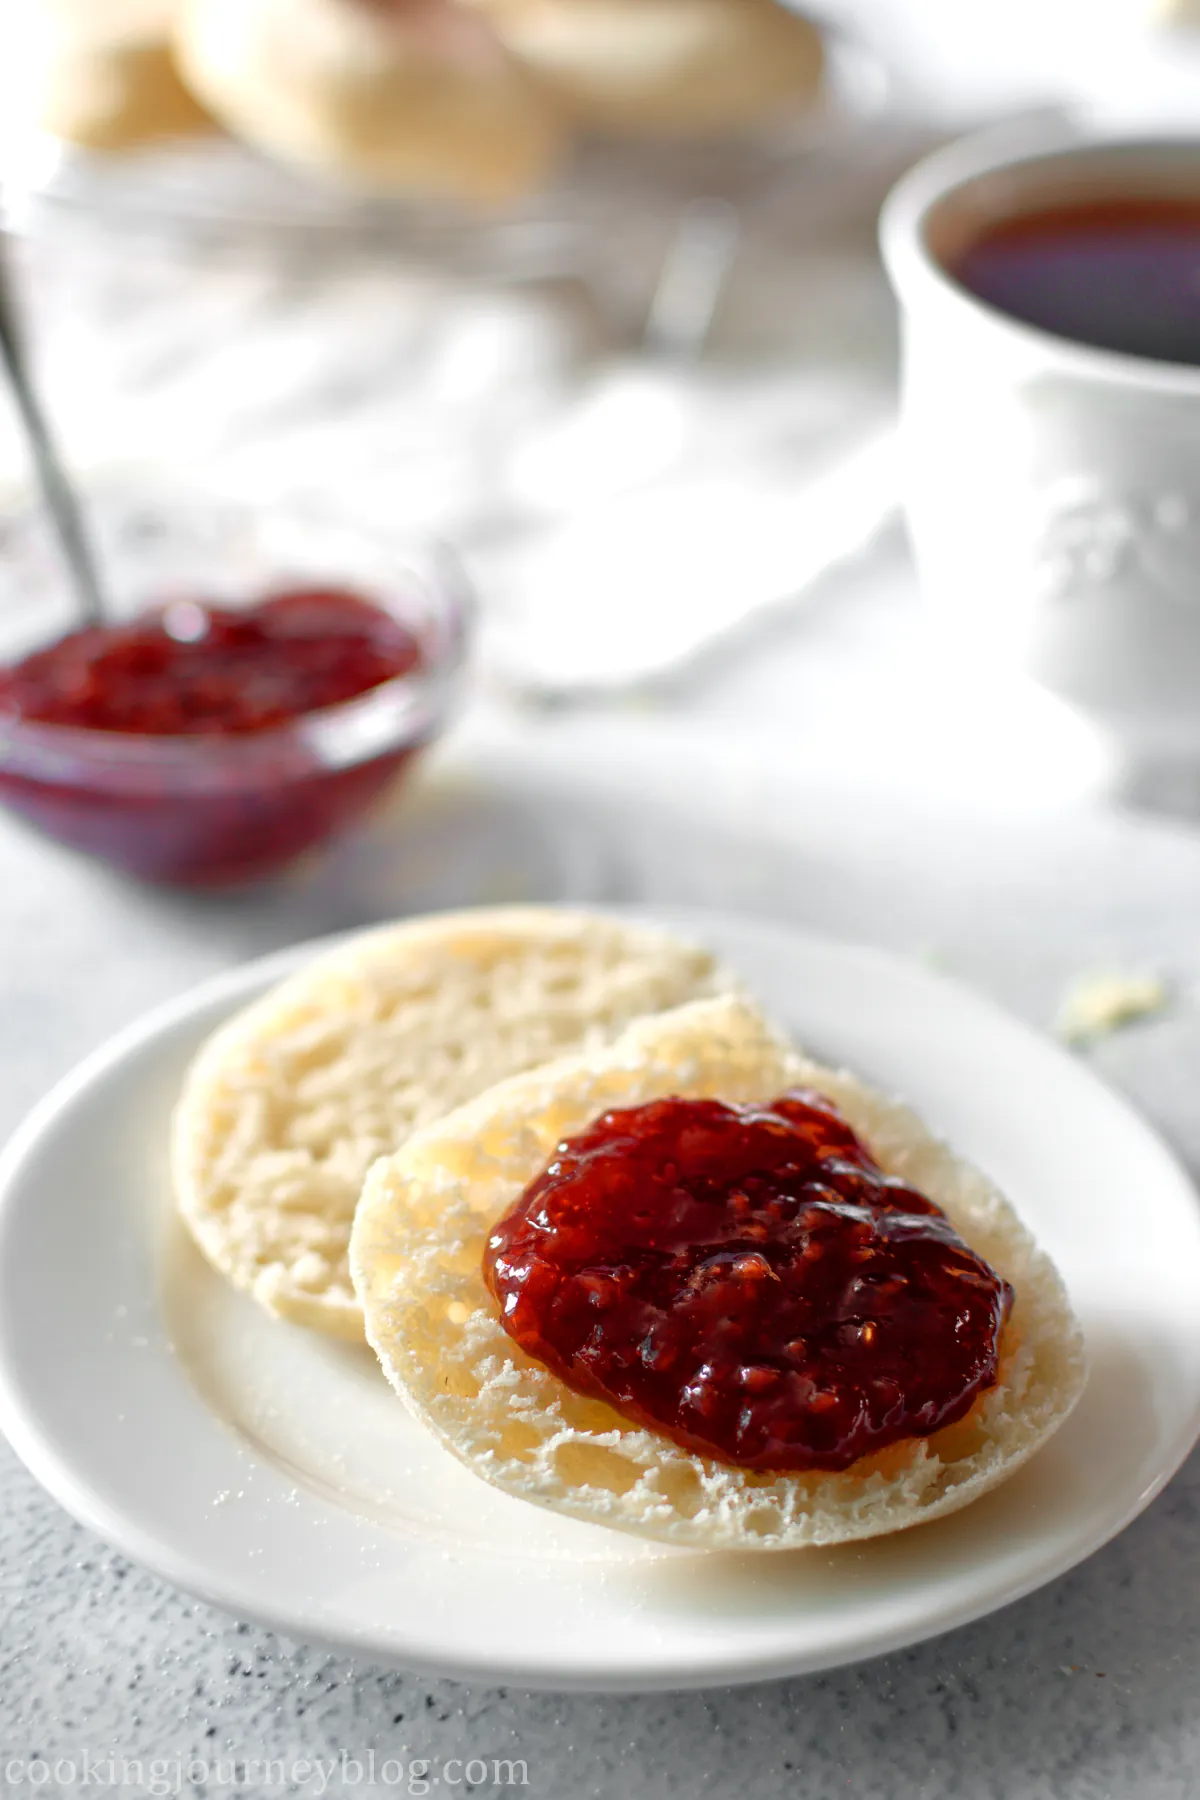 Vegan English muffins, cut in half and served with strawberry jam on top